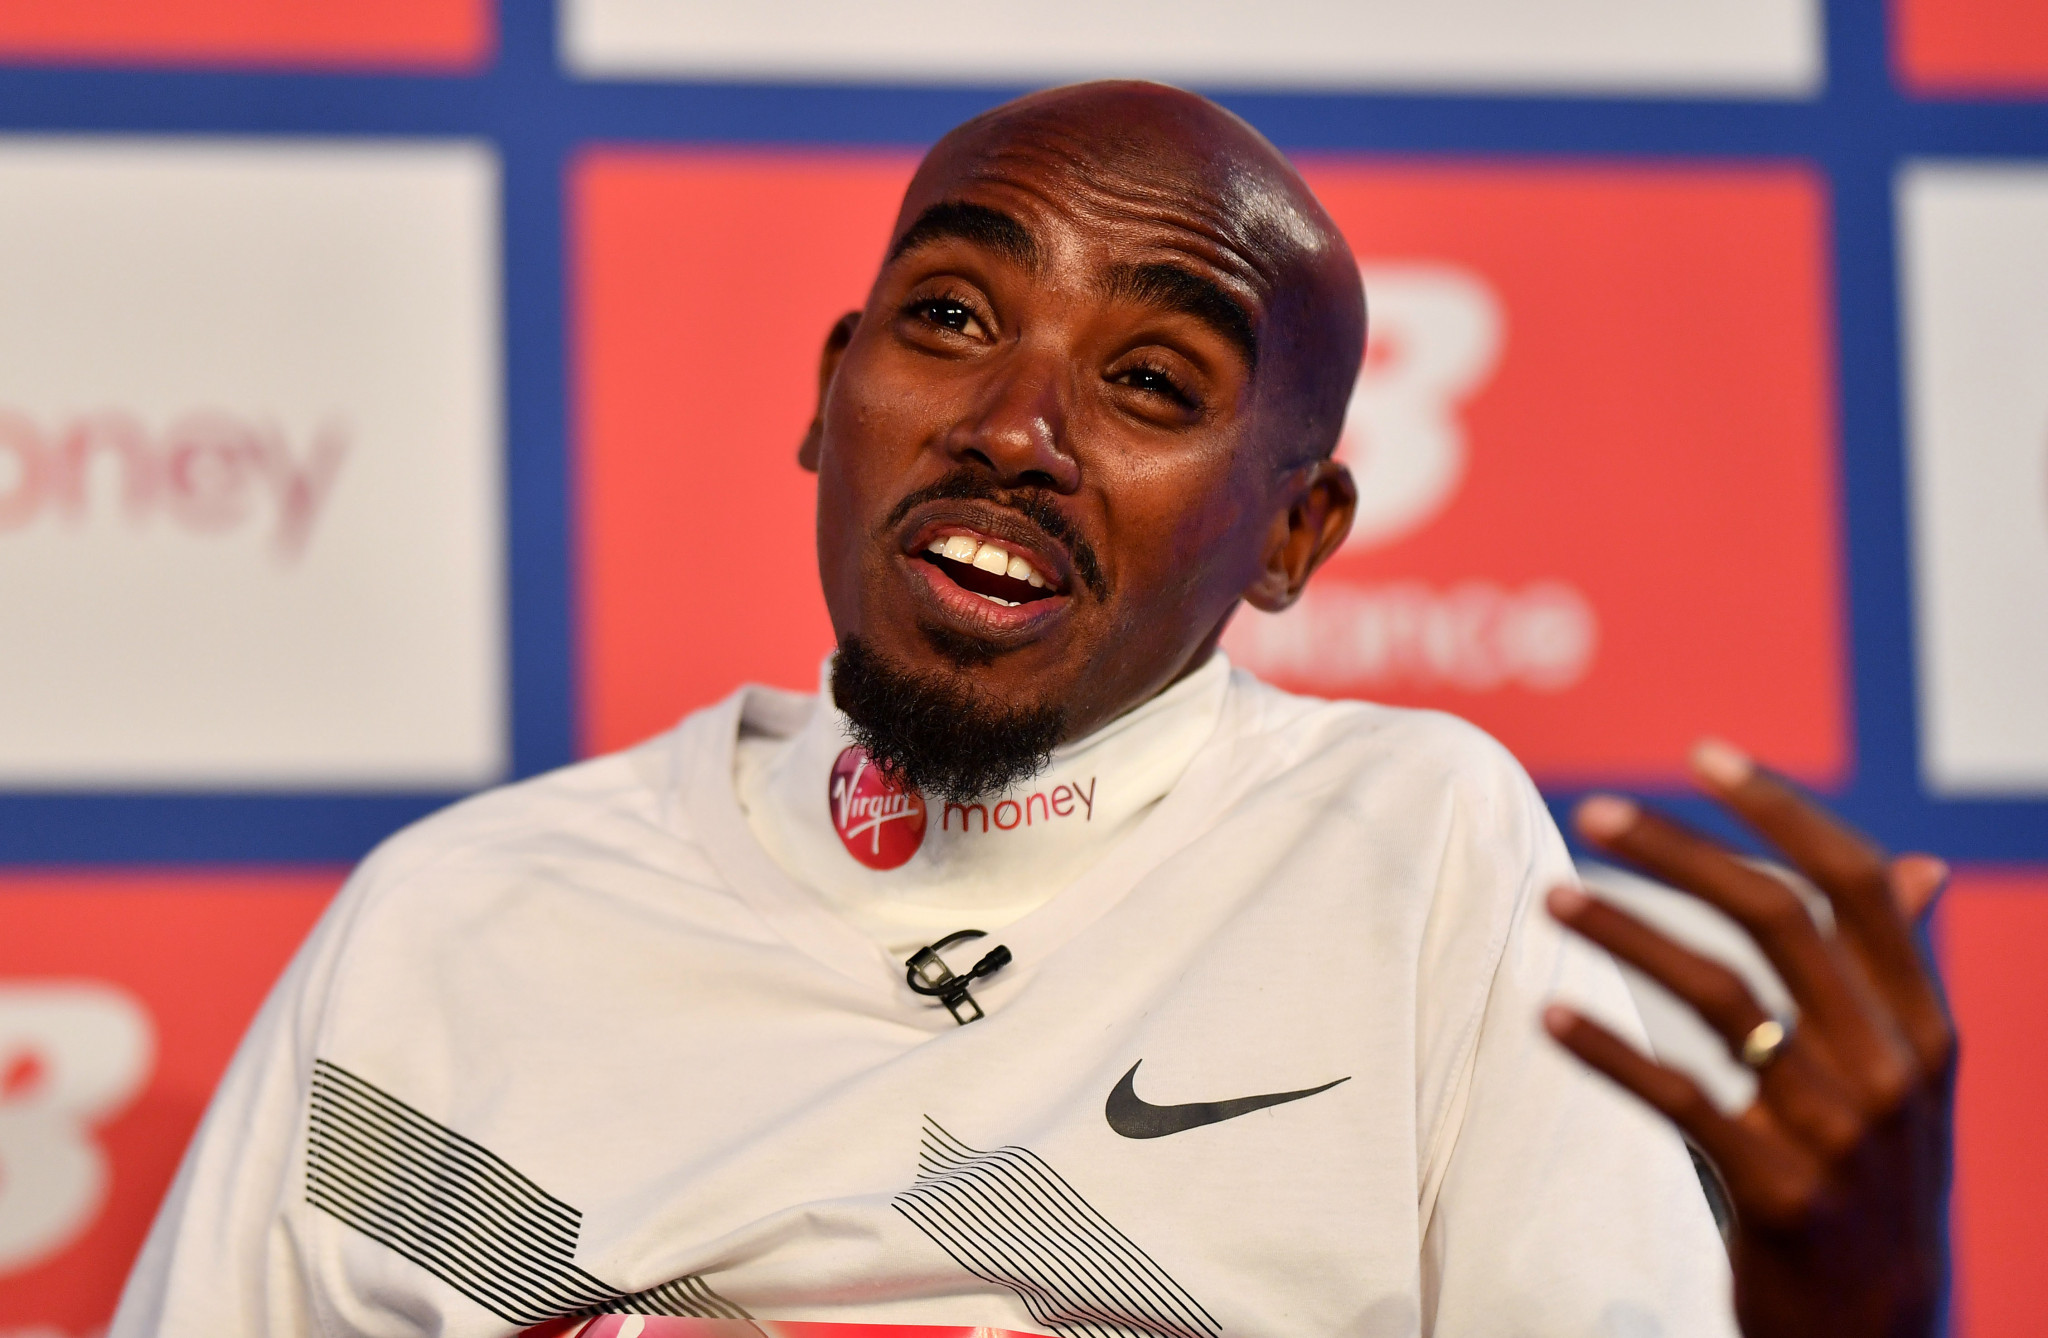 A relaxed Sir Mo Farah admitted victory at the London Marathon Sunday was unlikely agains such a strong field but revealed he believed he could break the 33-year-old British record set by Steve Jones ©Getty Images